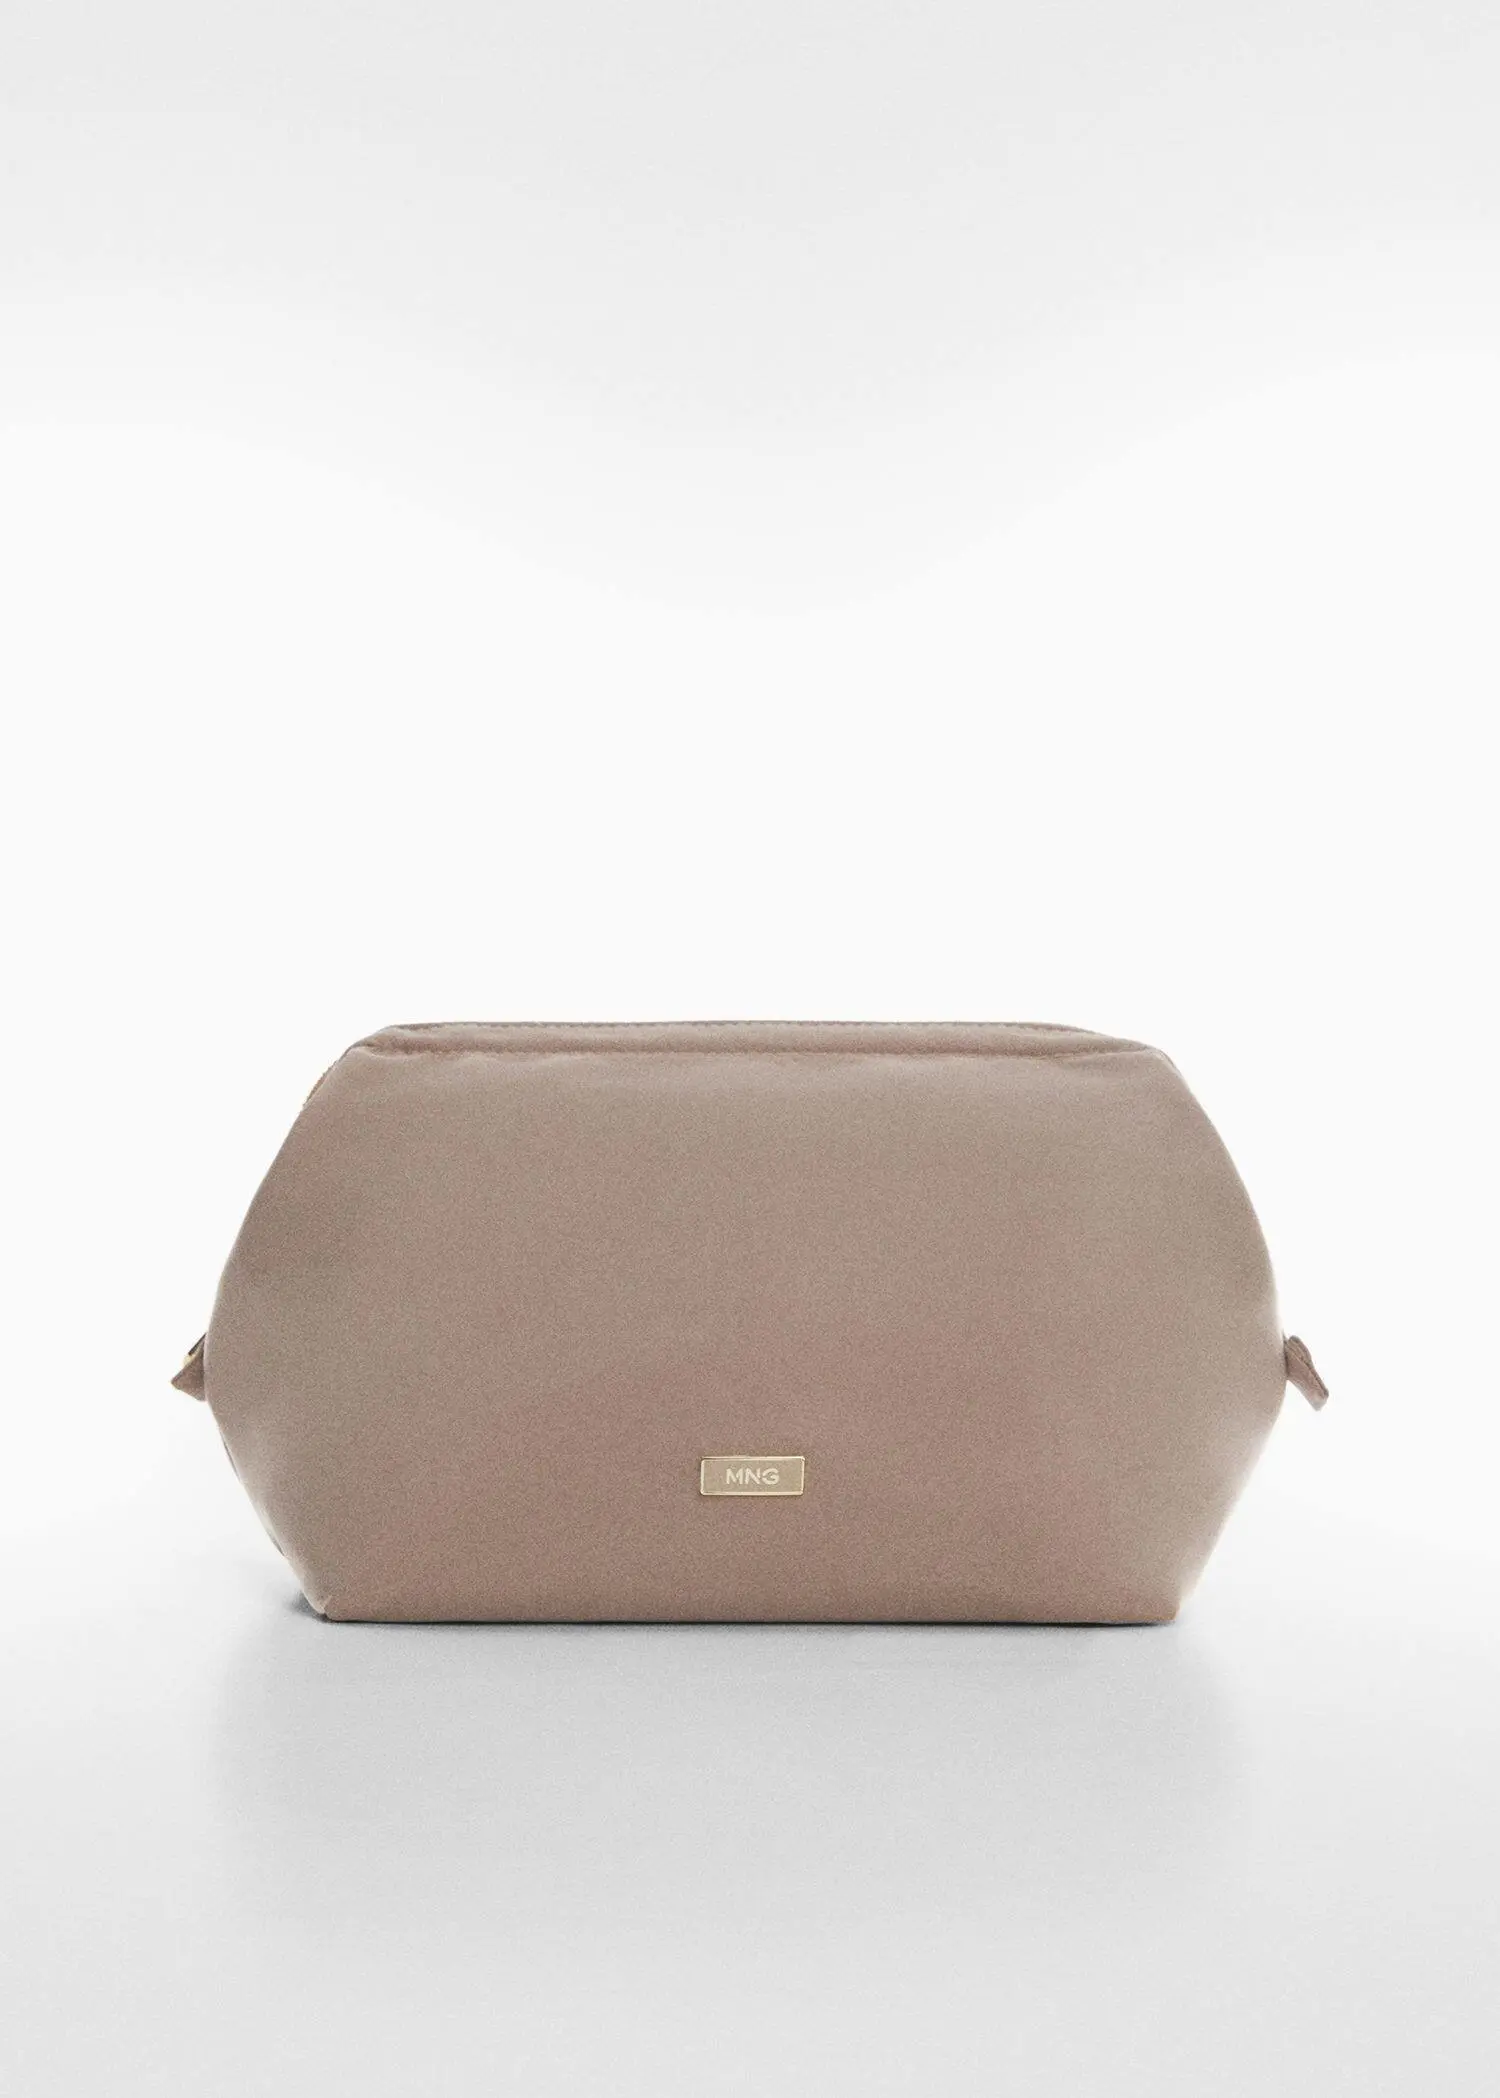 Mango Zipped nylon cosmetics bag. a beige purse sitting on top of a white table. 